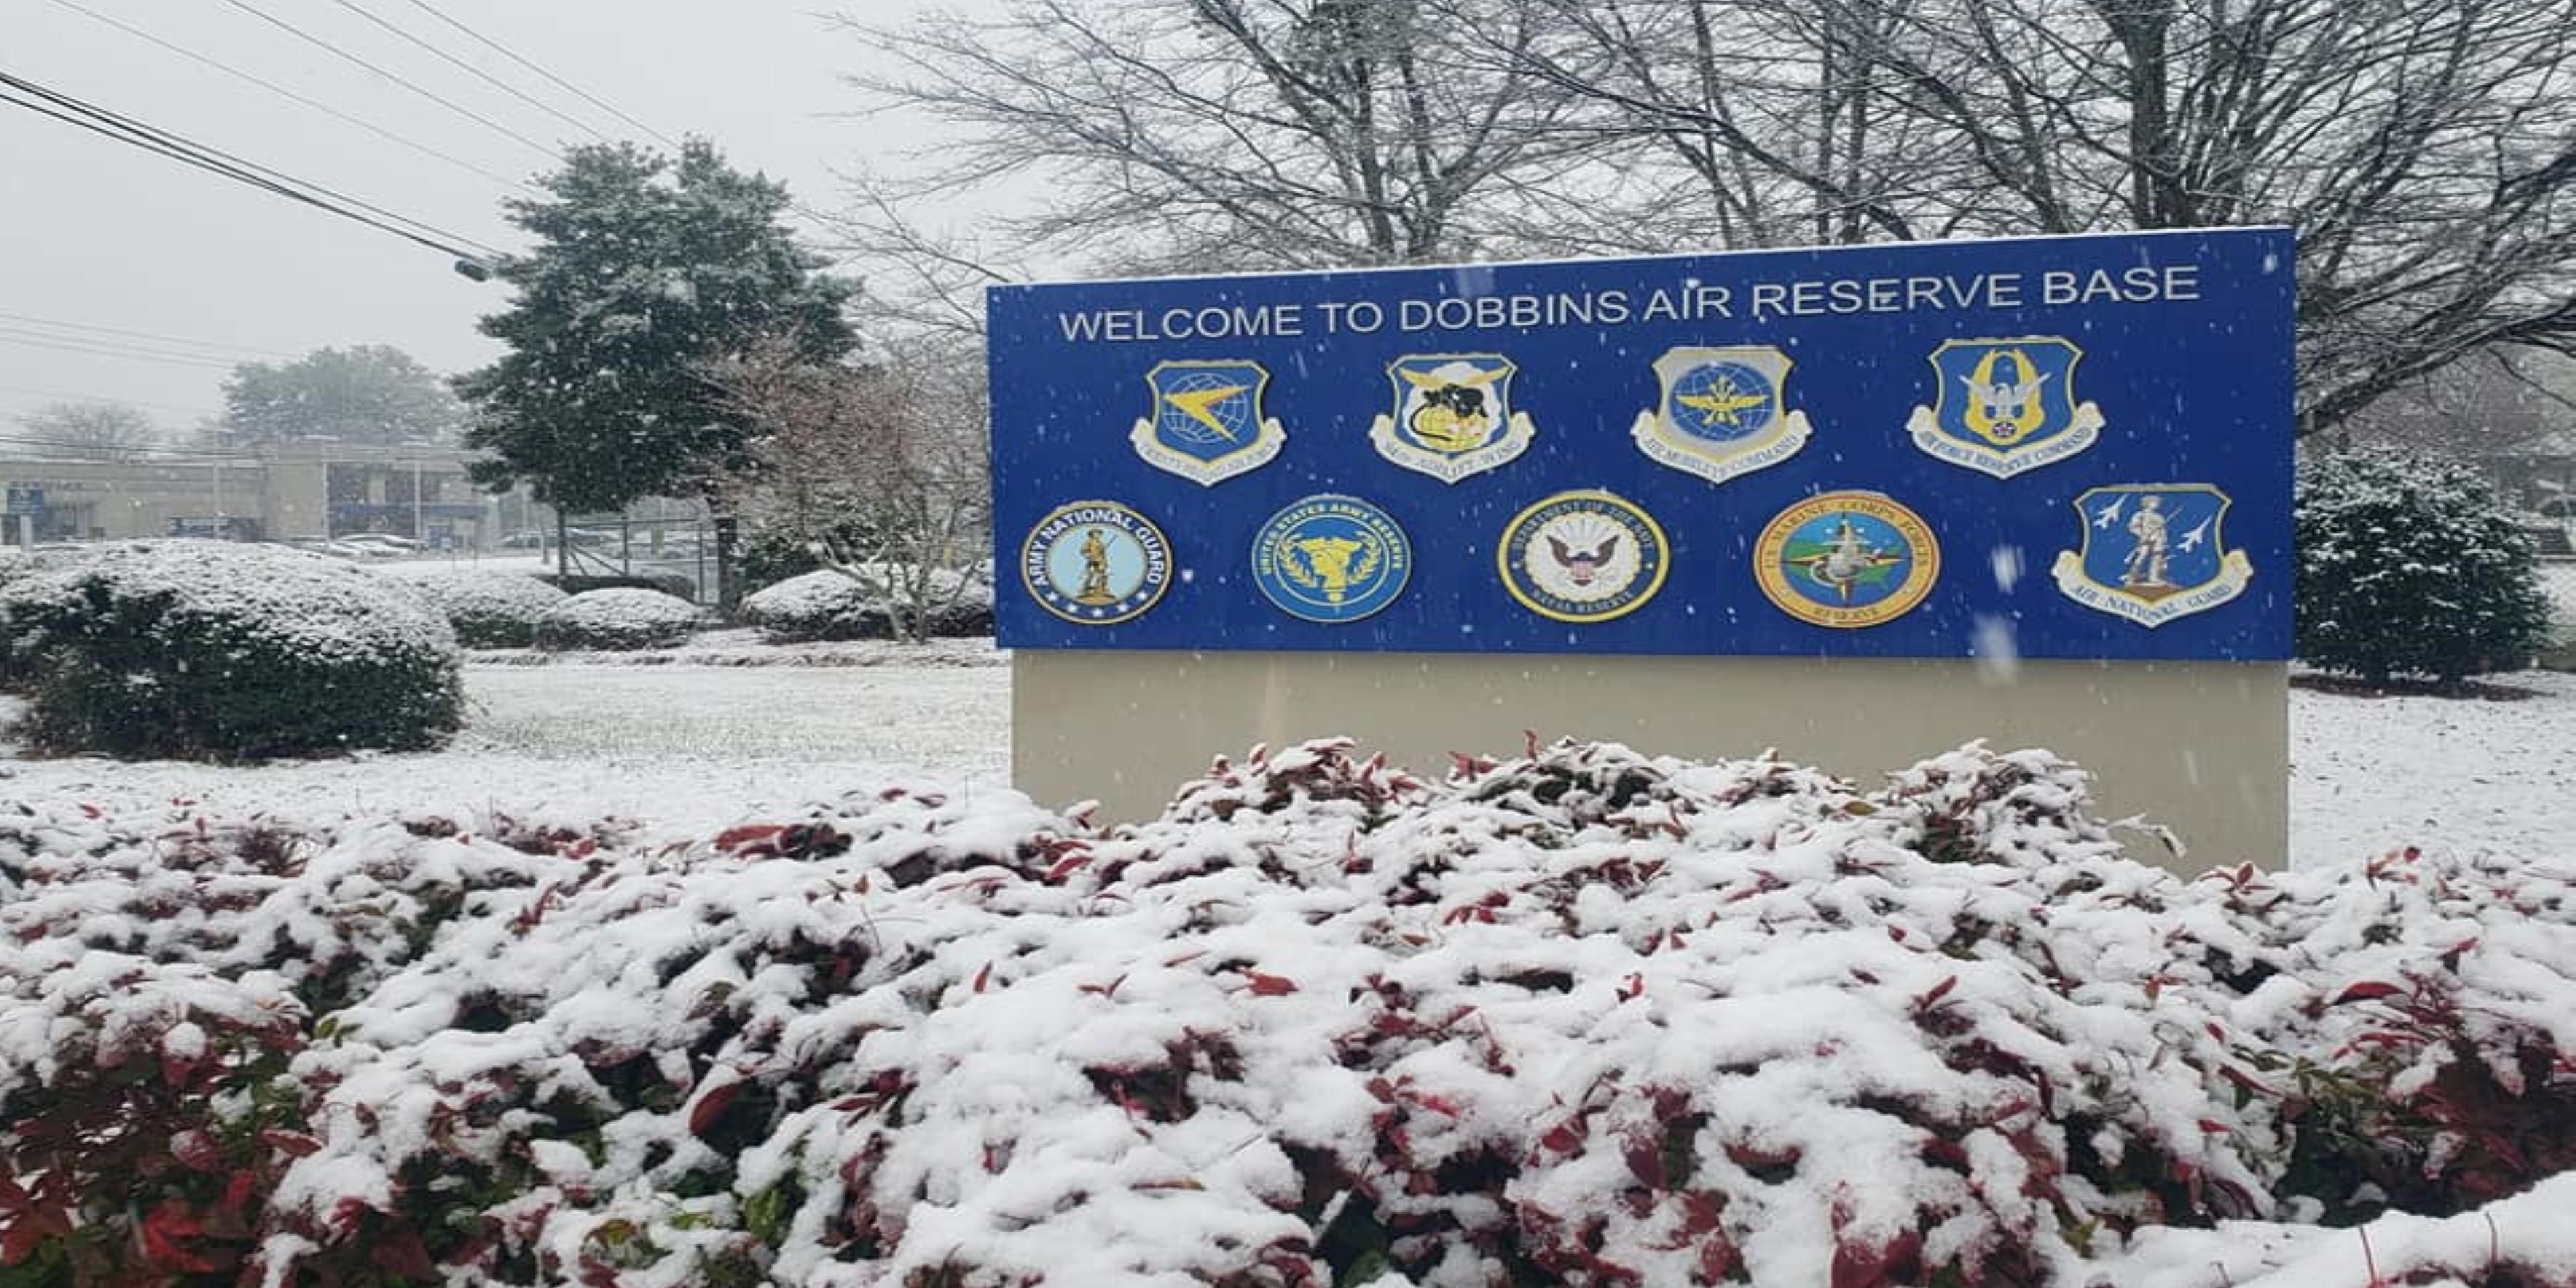 Dobbins Air Force Base is located 10 miles from the hotel. Hotel is near restaurants, shopping and attractions.